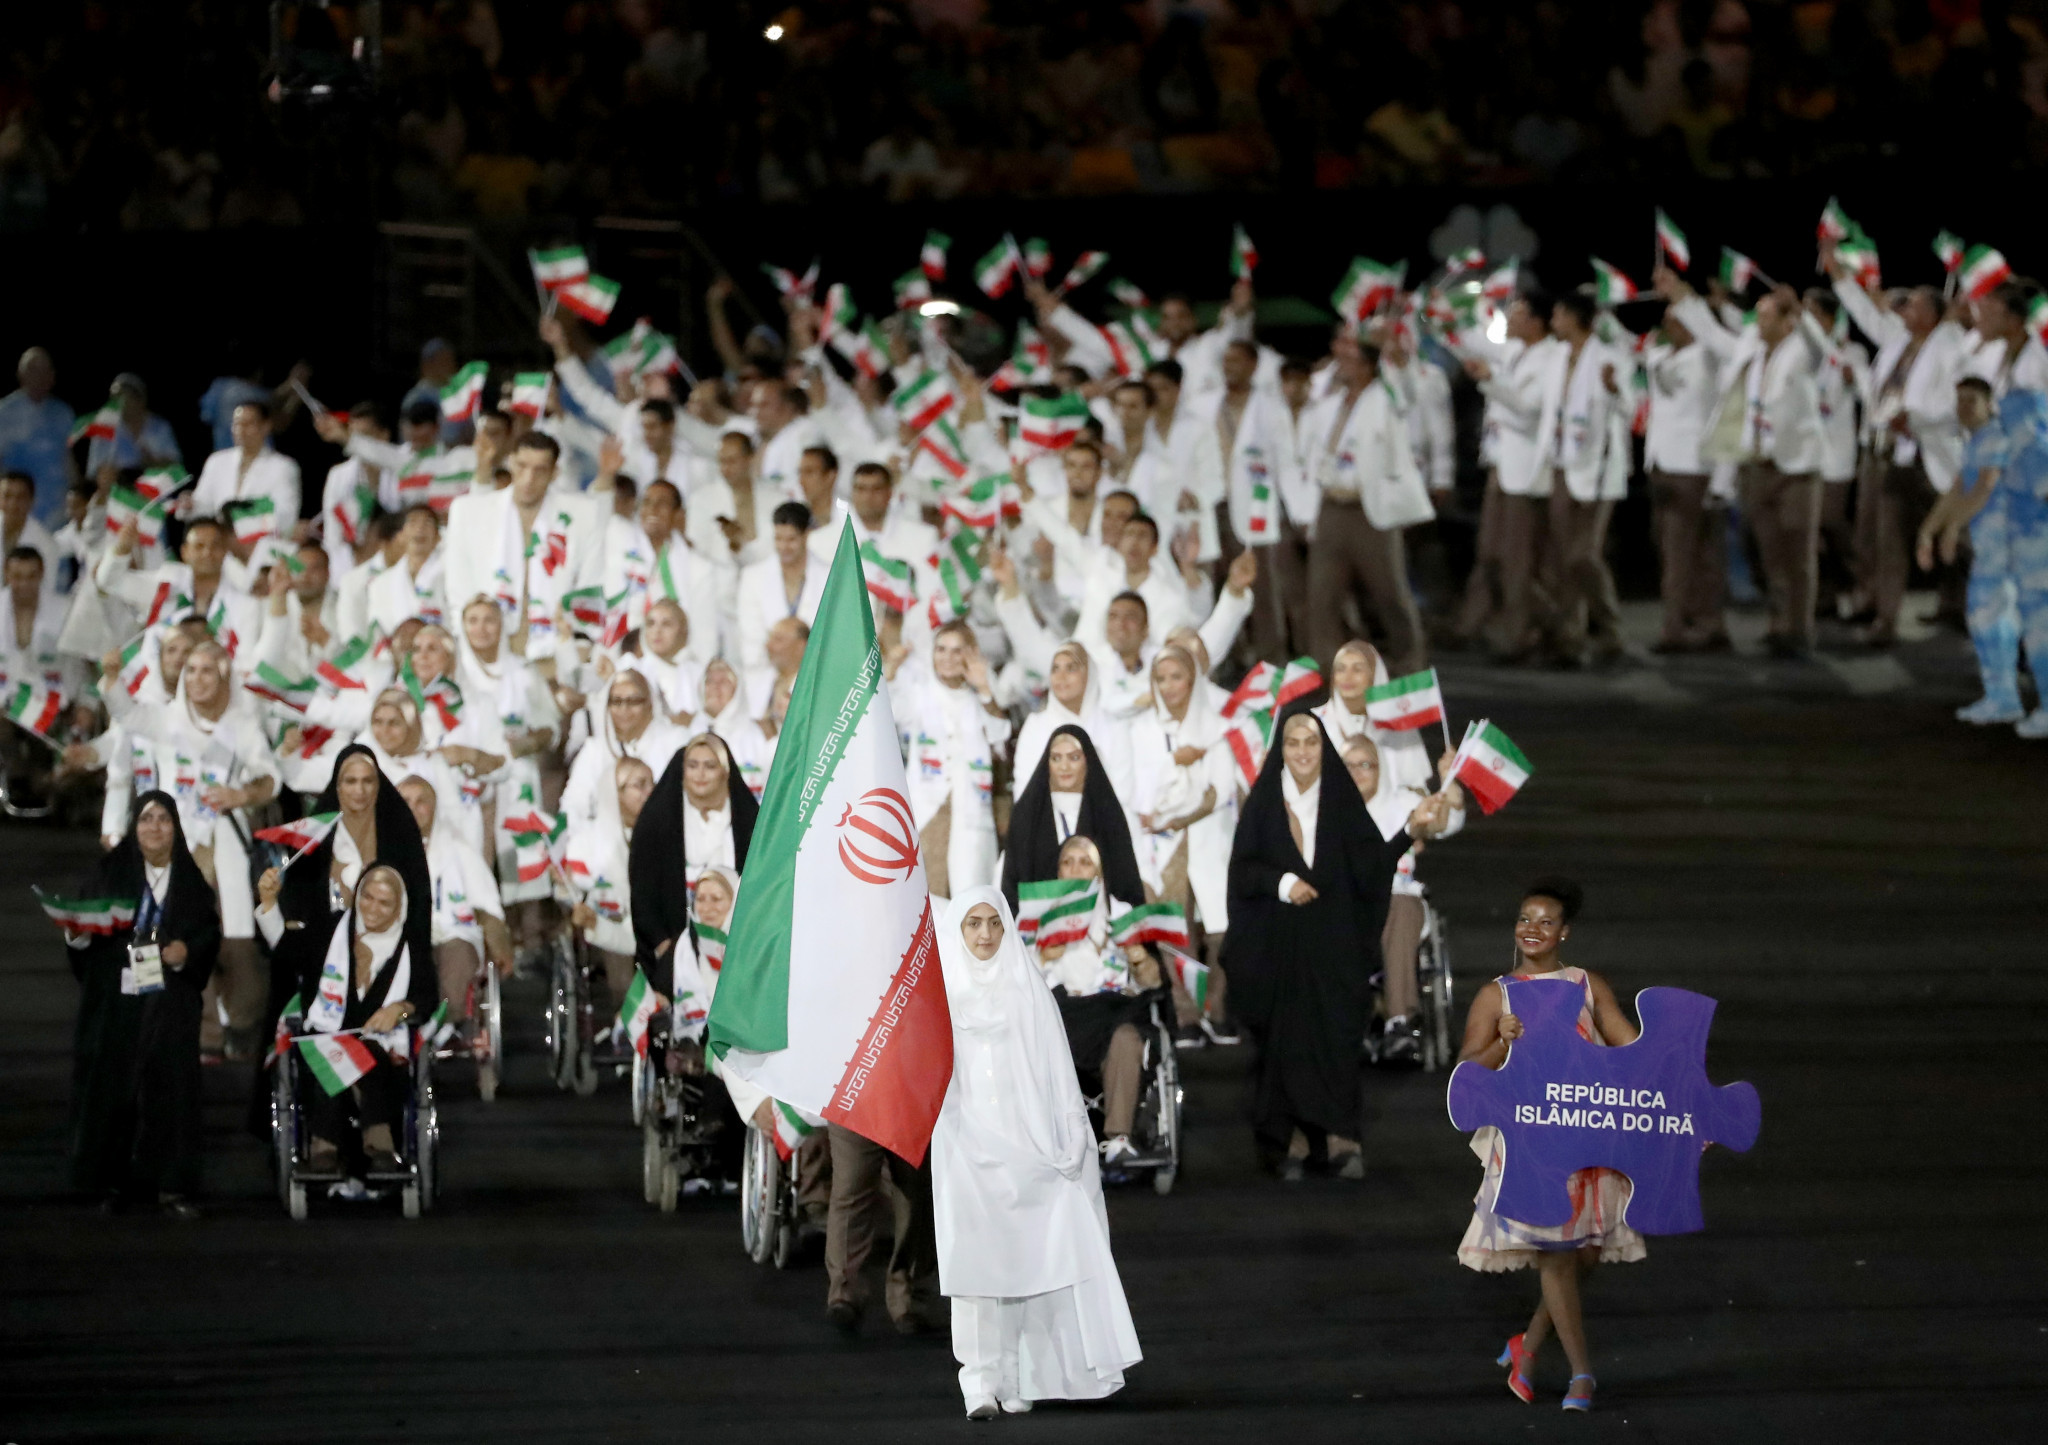 Iran have been set a target of finishing among the top 10 countries at the 2020 Paralympic Games in Tokyo ©Getty Images